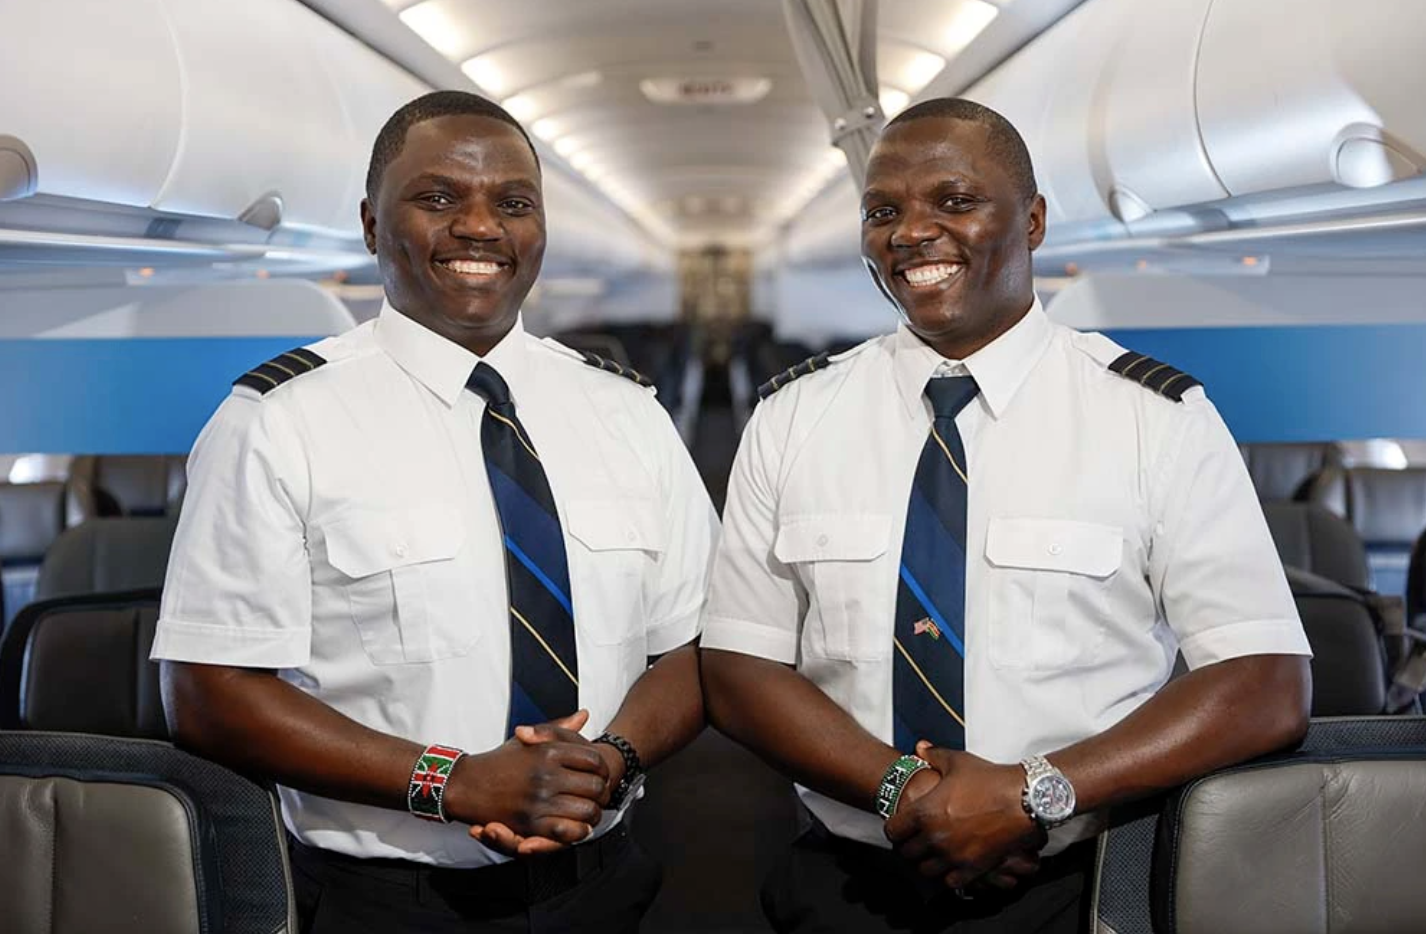 Black Excellence: Meet The Identical Twin Brothers Who Are Alaska Airlines Pilots